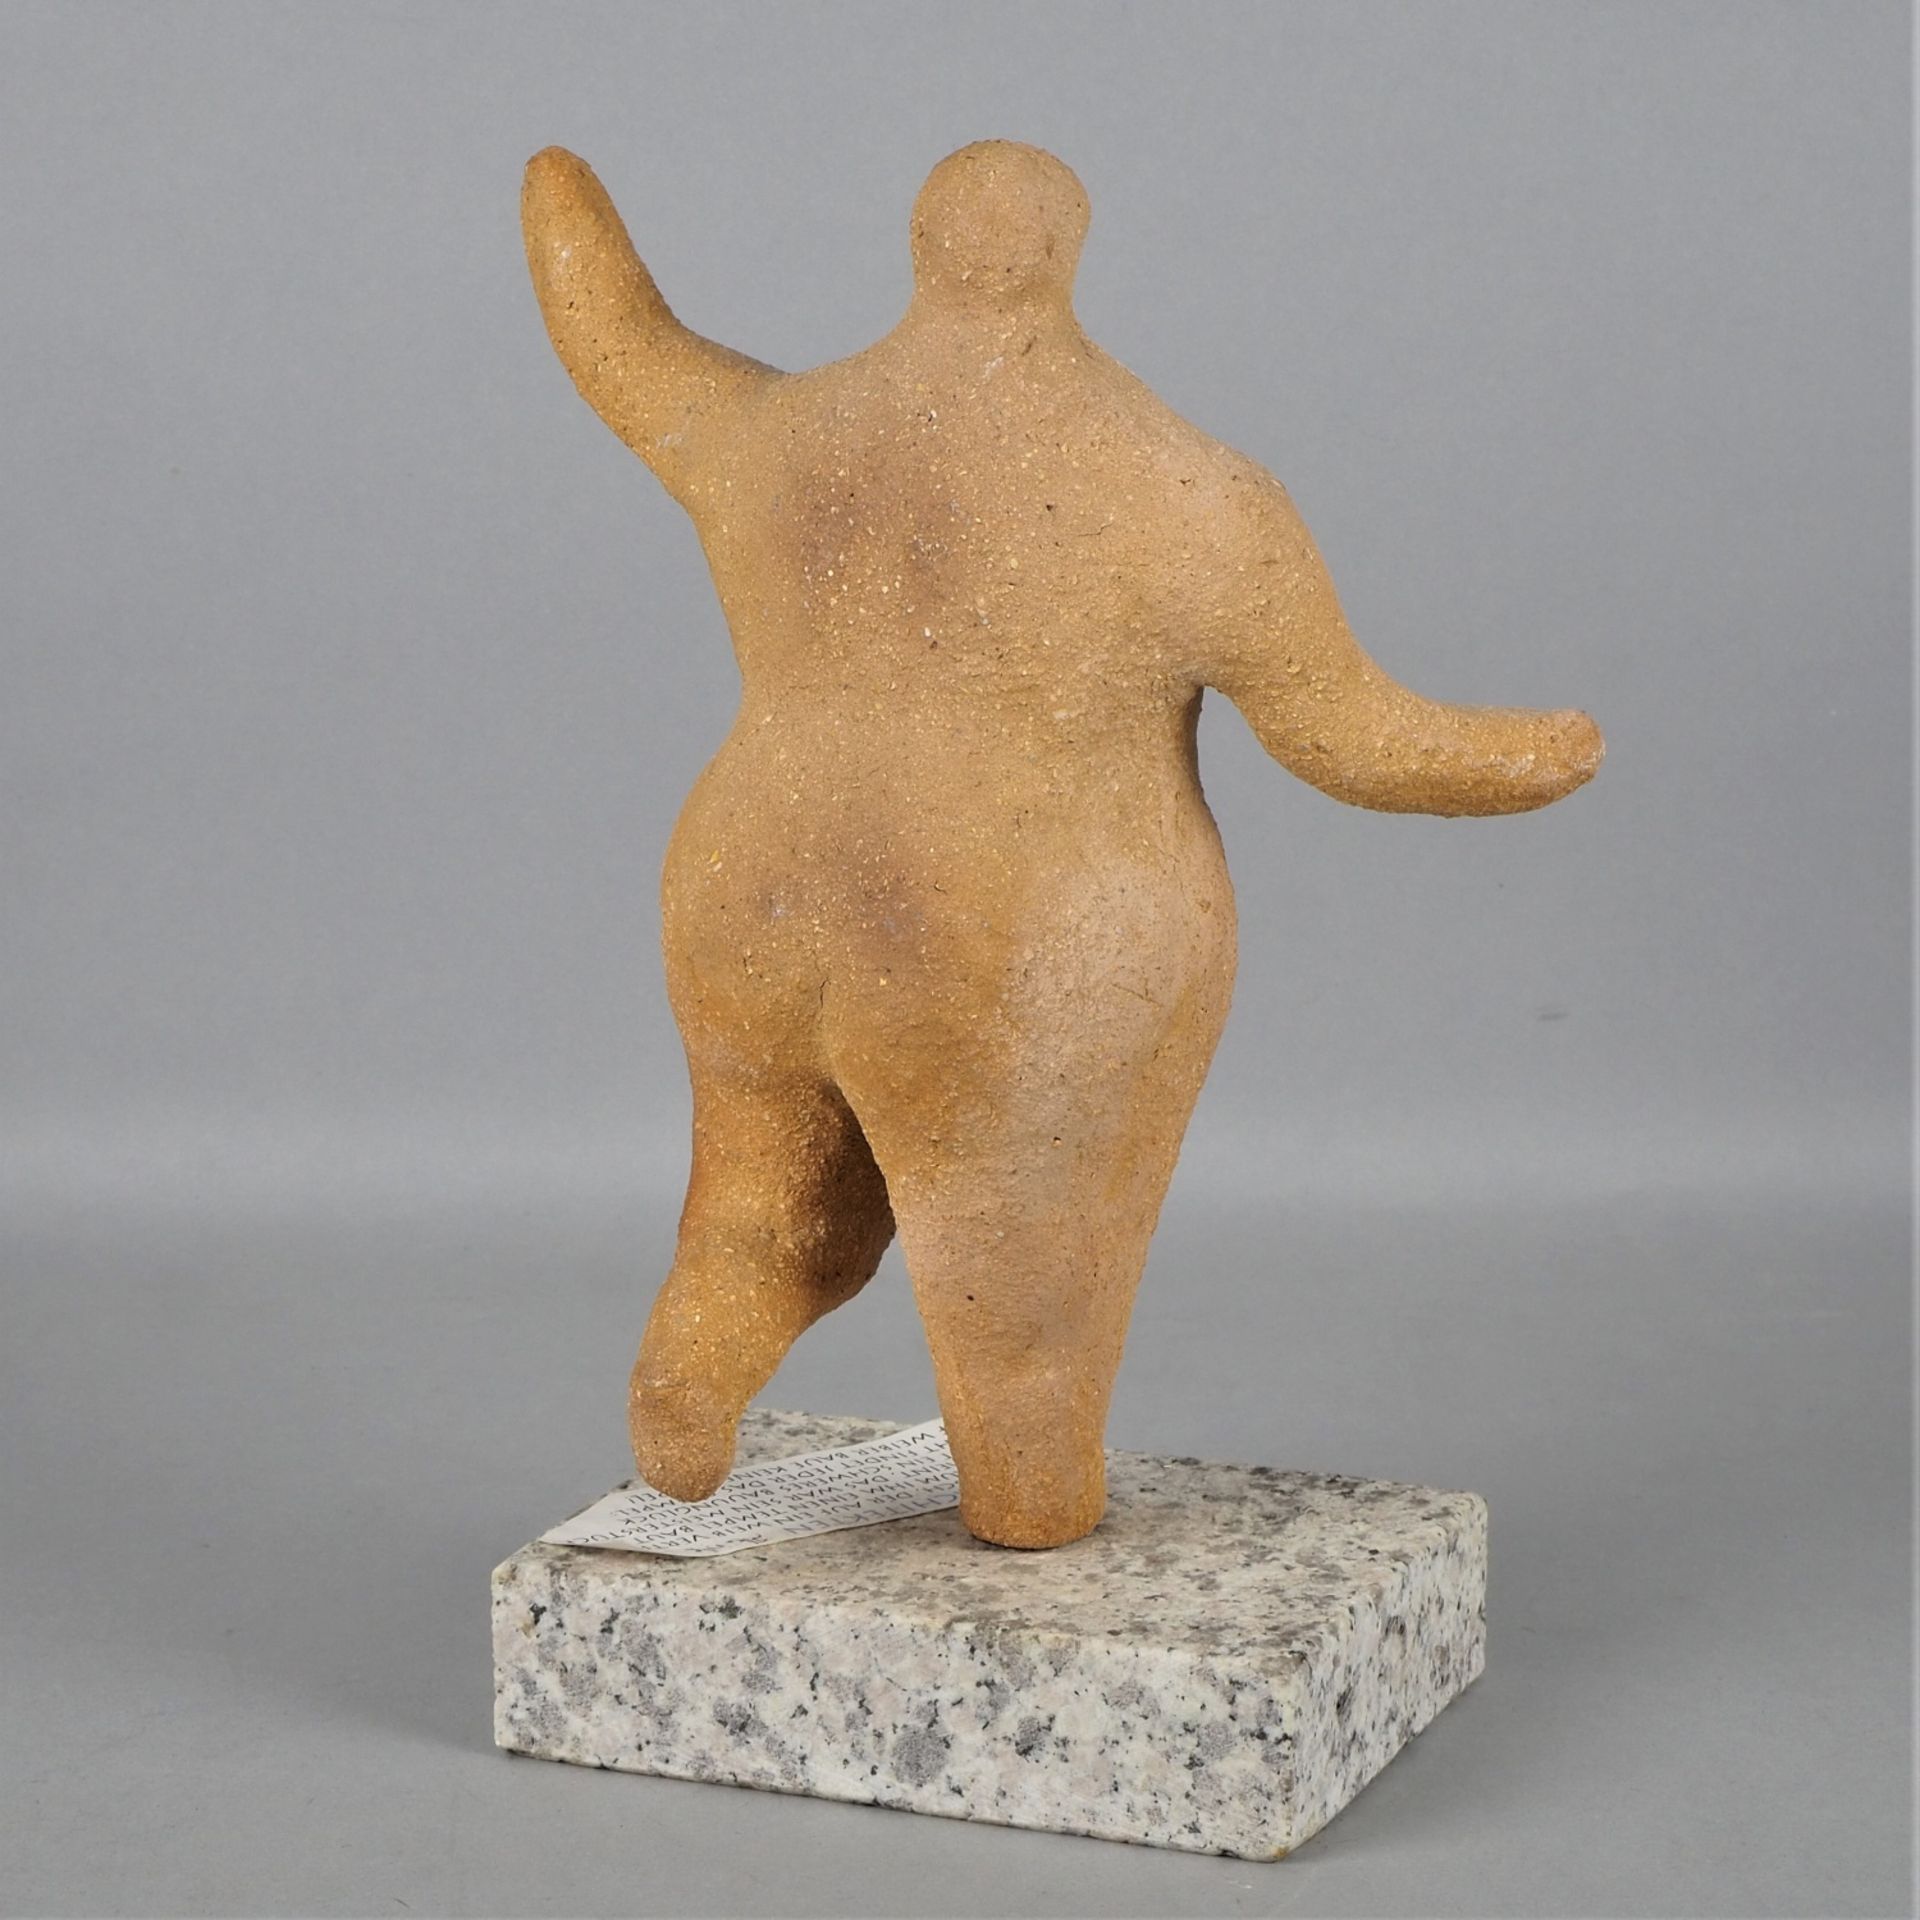 Terracotta table figure "Fat lady", 20th c. - Image 2 of 3